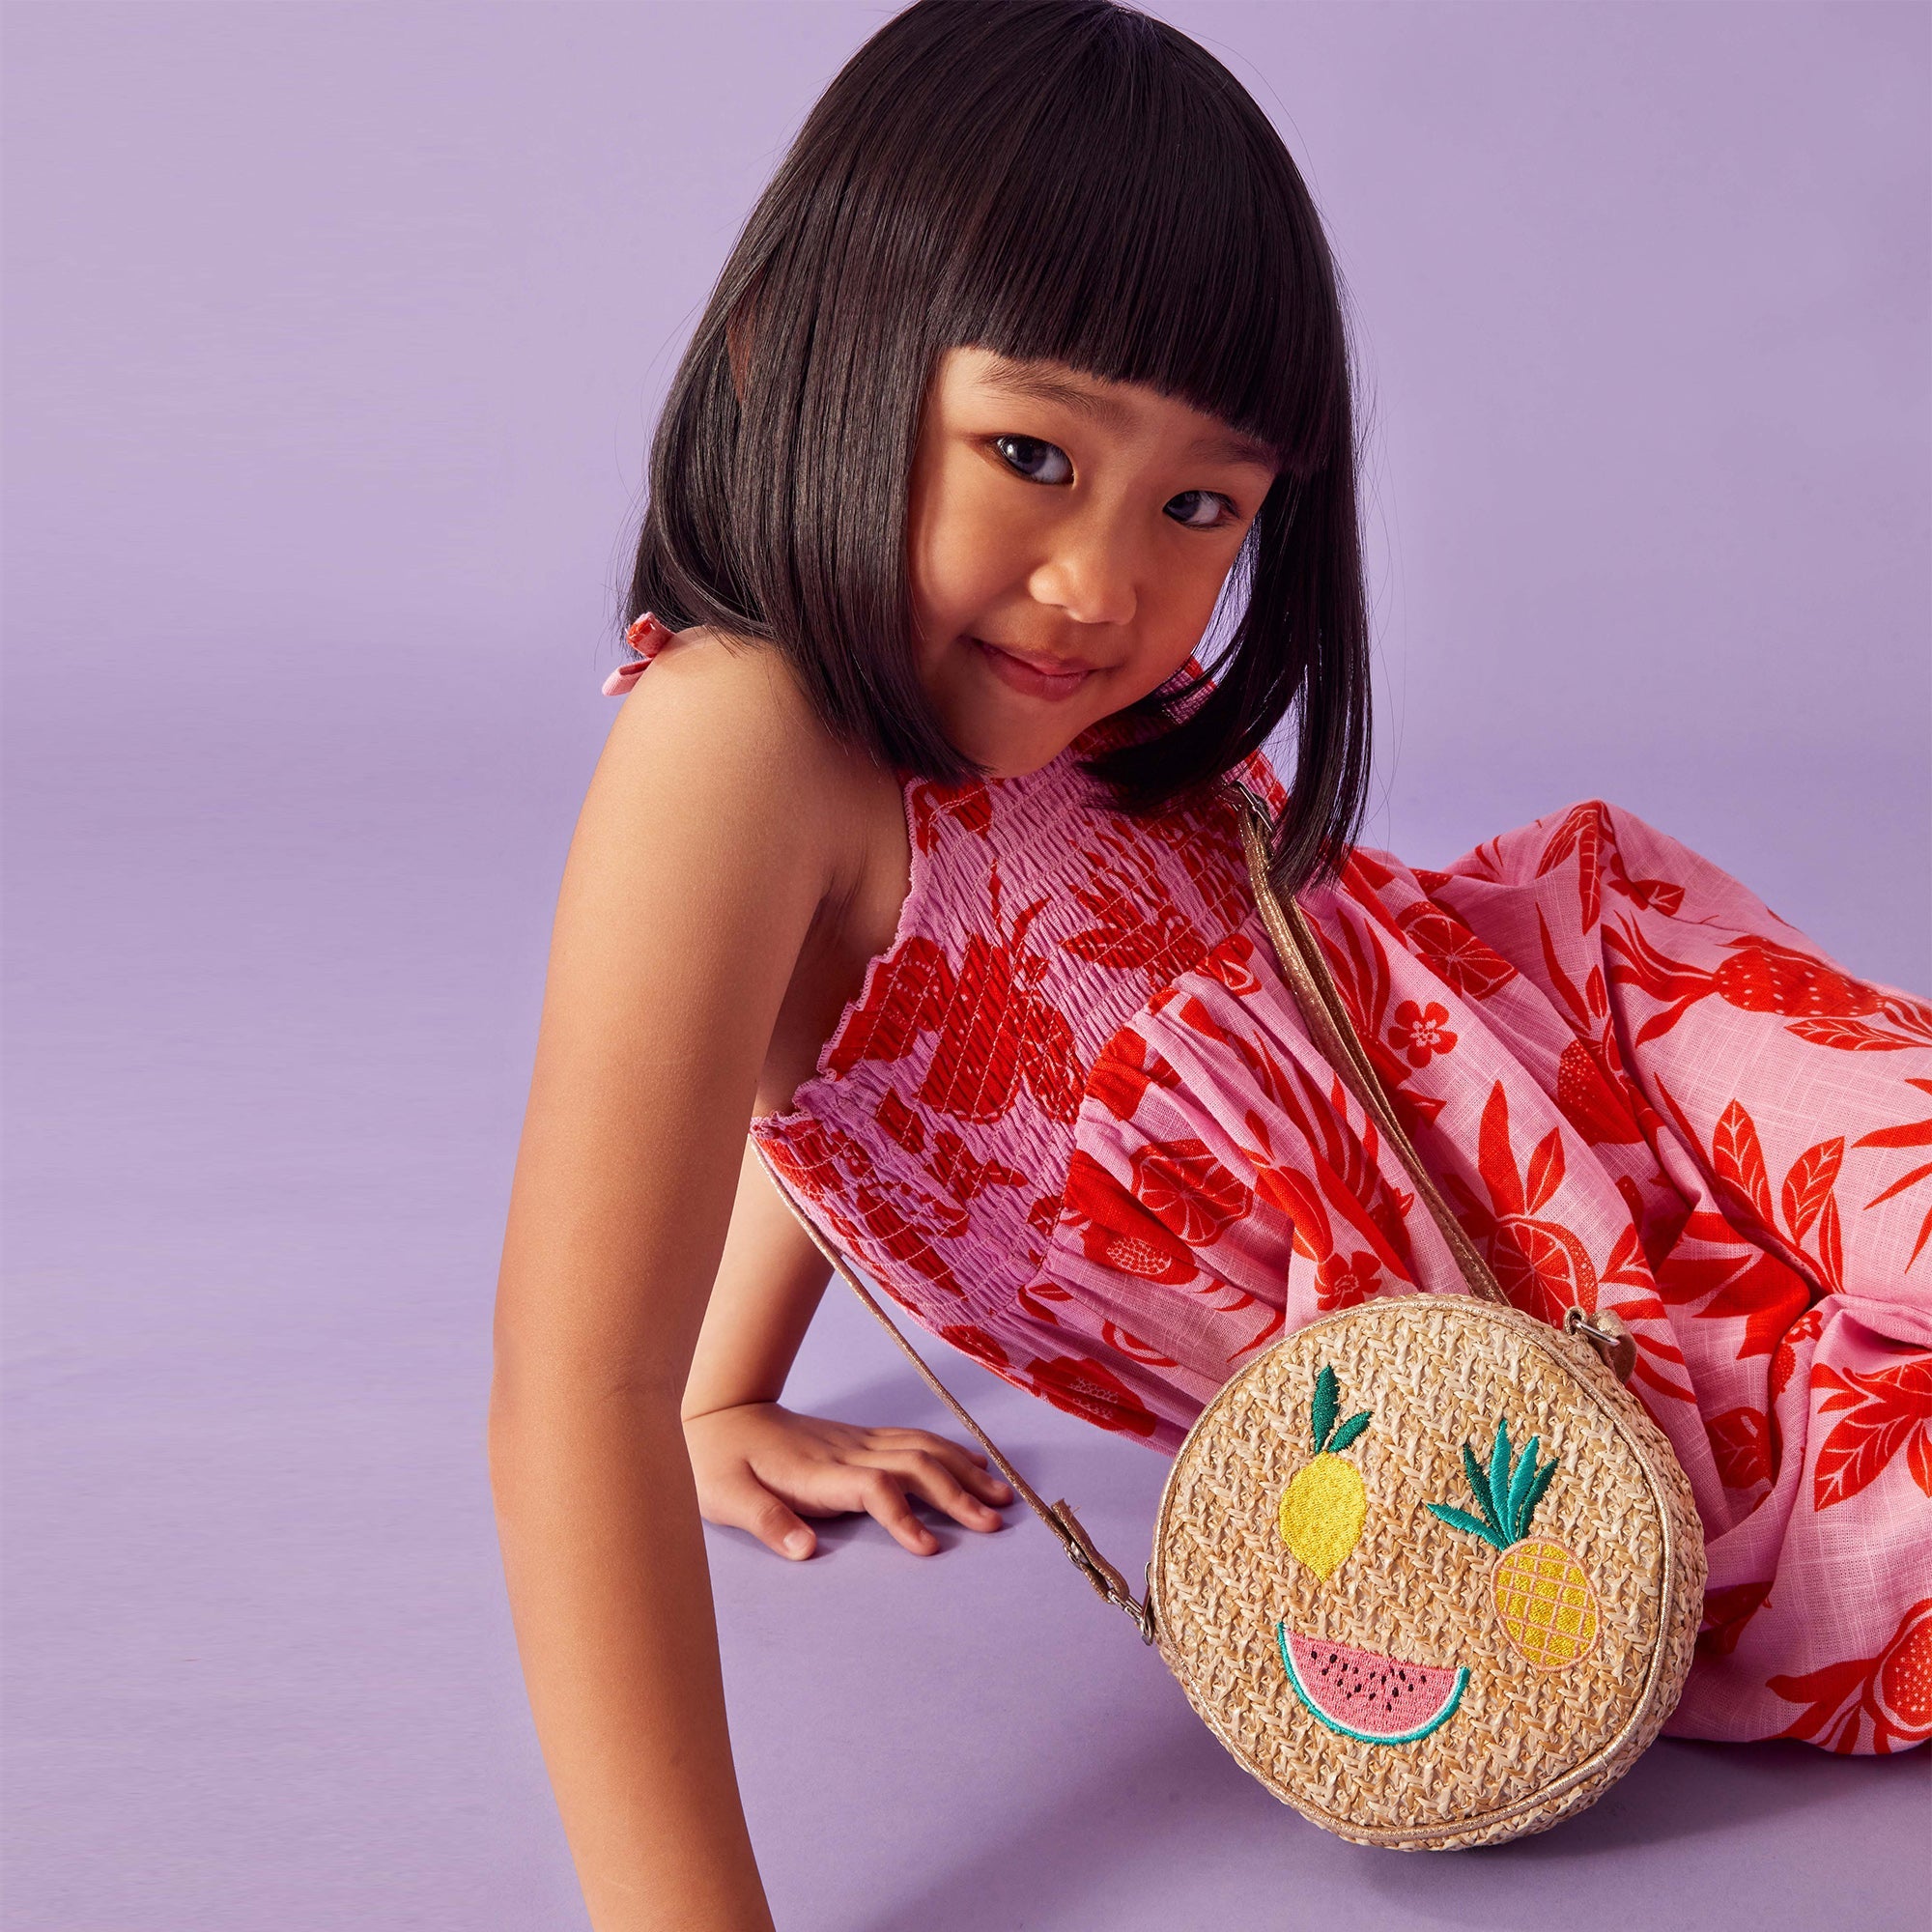 Accessorize London Girl's Fruit Embroidered Straw Bag